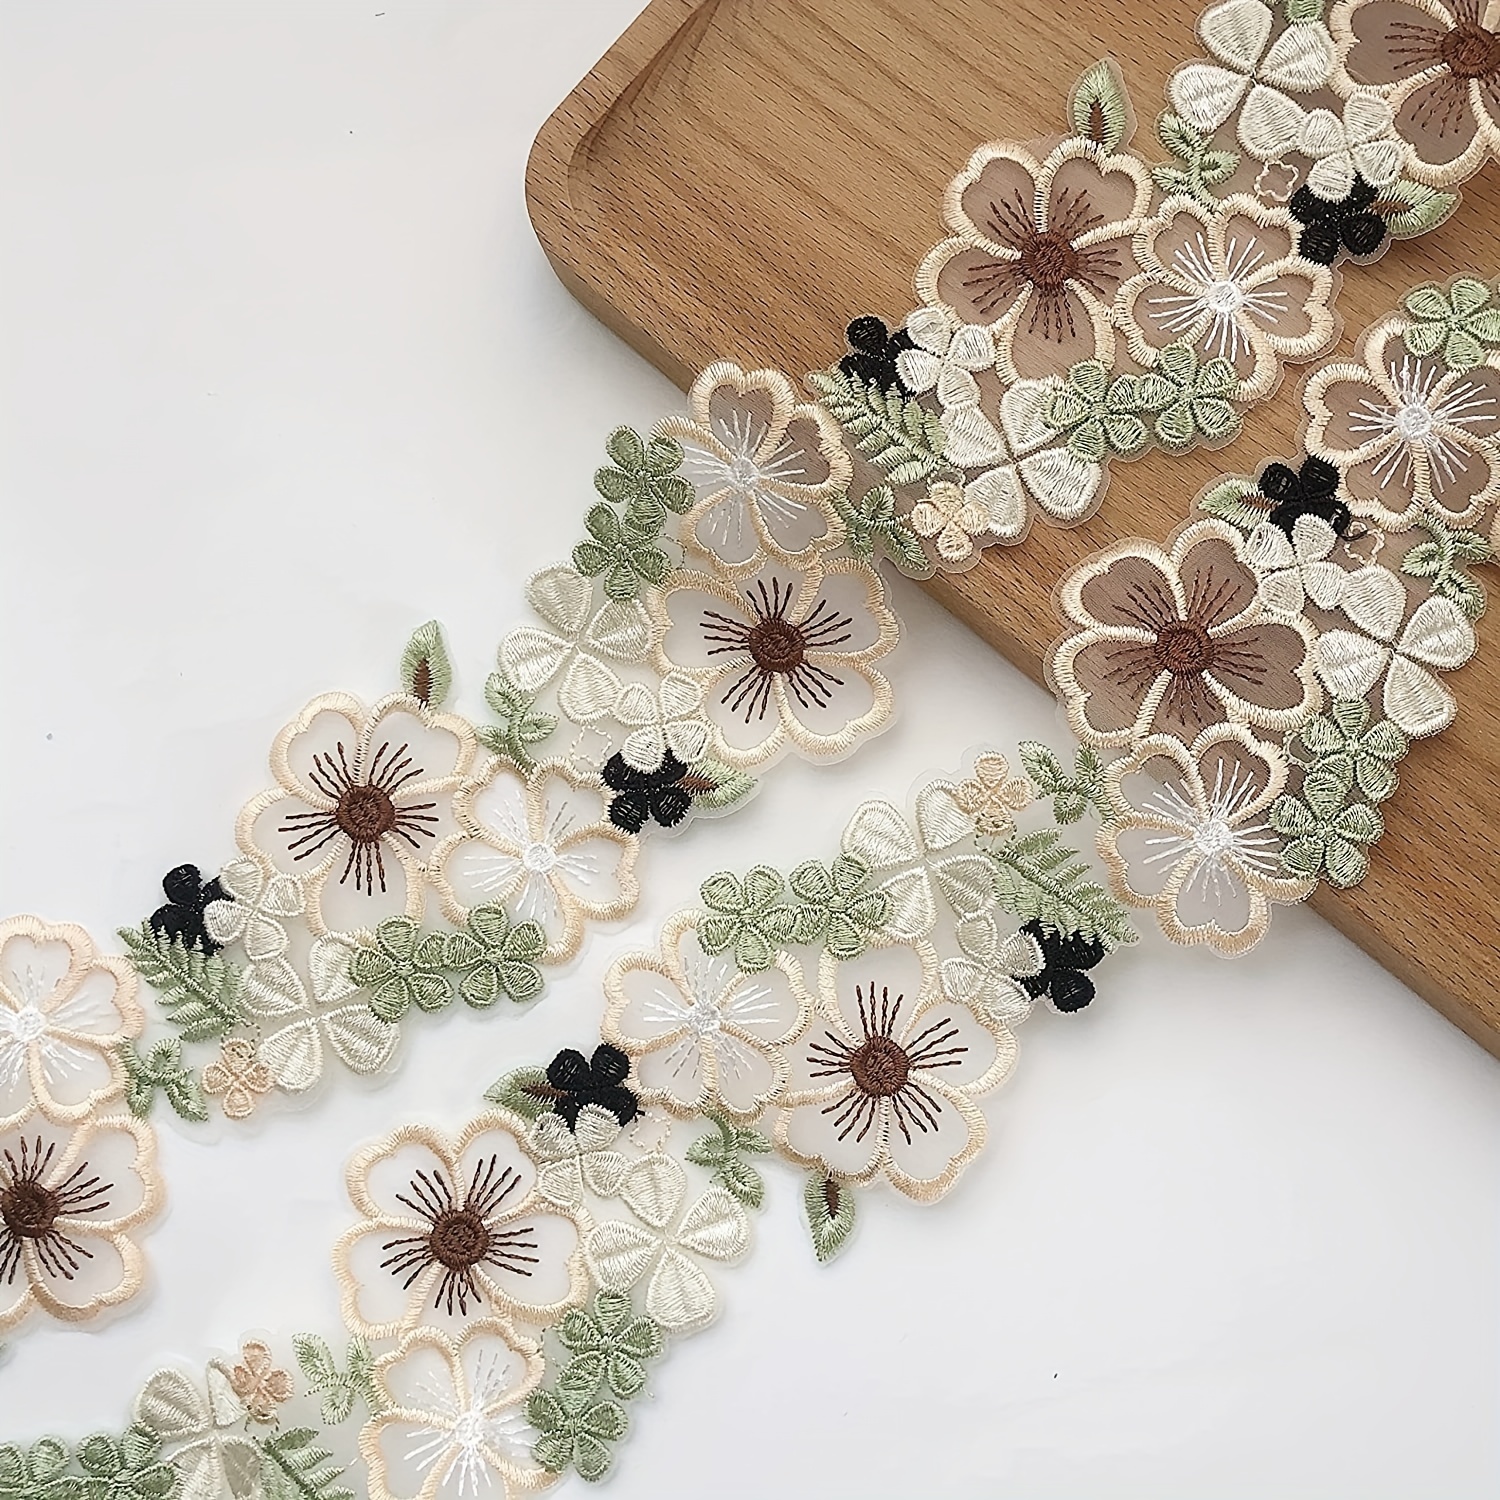 1yard Width:5.7cm (2.28) New Models Flower Lace Handmade Cotton Laces  Sewing Lace Trims Decorative (ss-2033)